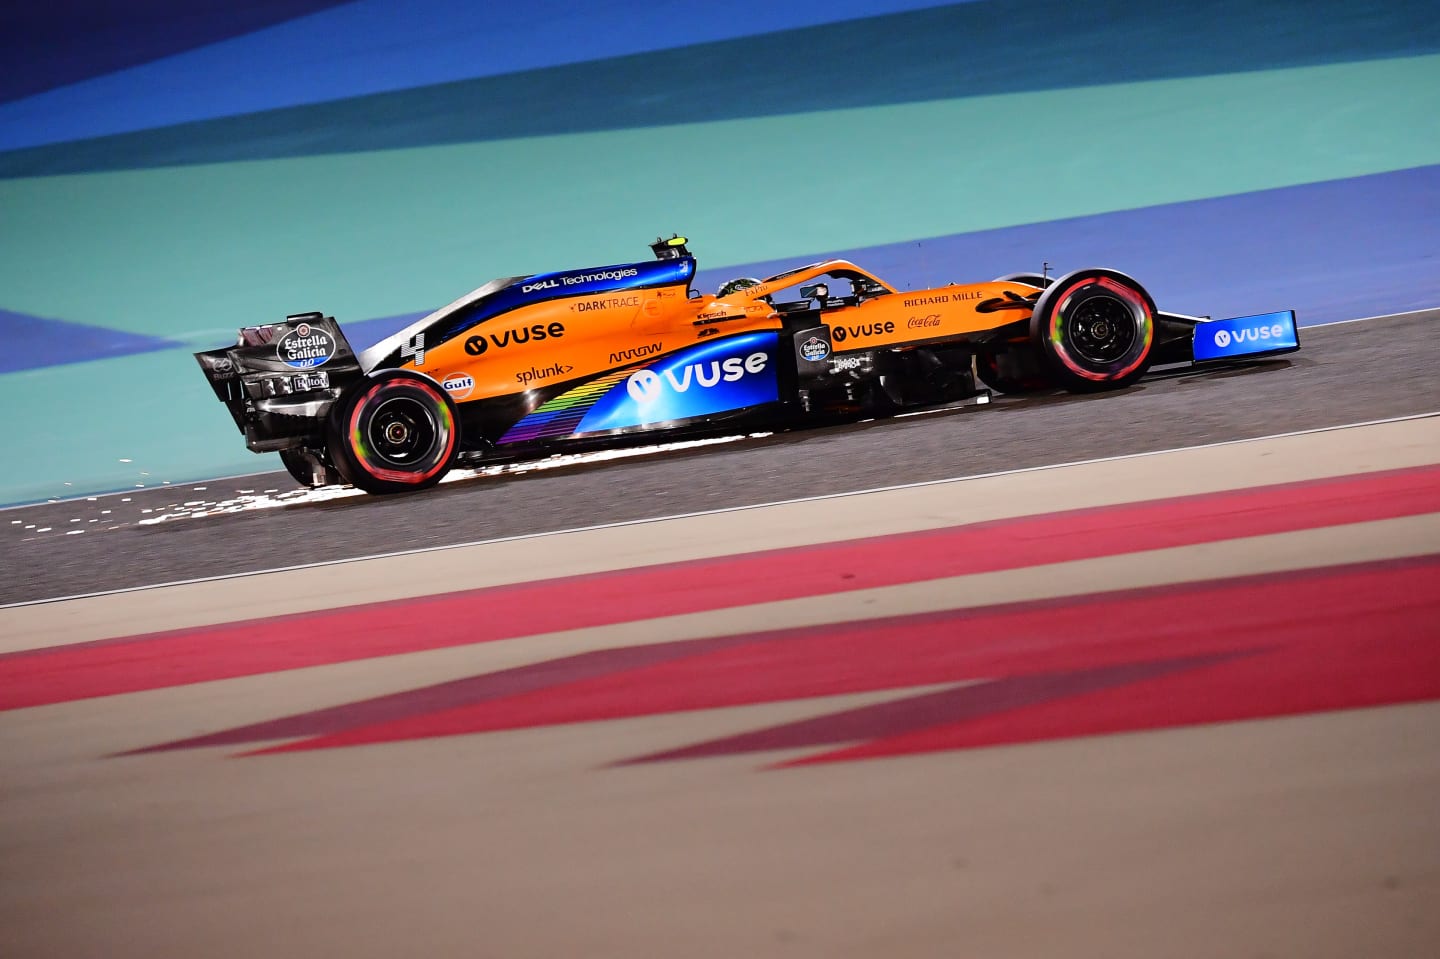 BAHRAIN, BAHRAIN - NOVEMBER 28: Lando Norris of Great Britain driving the (4) McLaren F1 Team MCL35 Renault on track during qualifying ahead of the F1 Grand Prix of Bahrain at Bahrain International Circuit on November 28, 2020 in Bahrain, Bahrain. (Photo by Giuseppe Cacace - Pool/Getty Images)